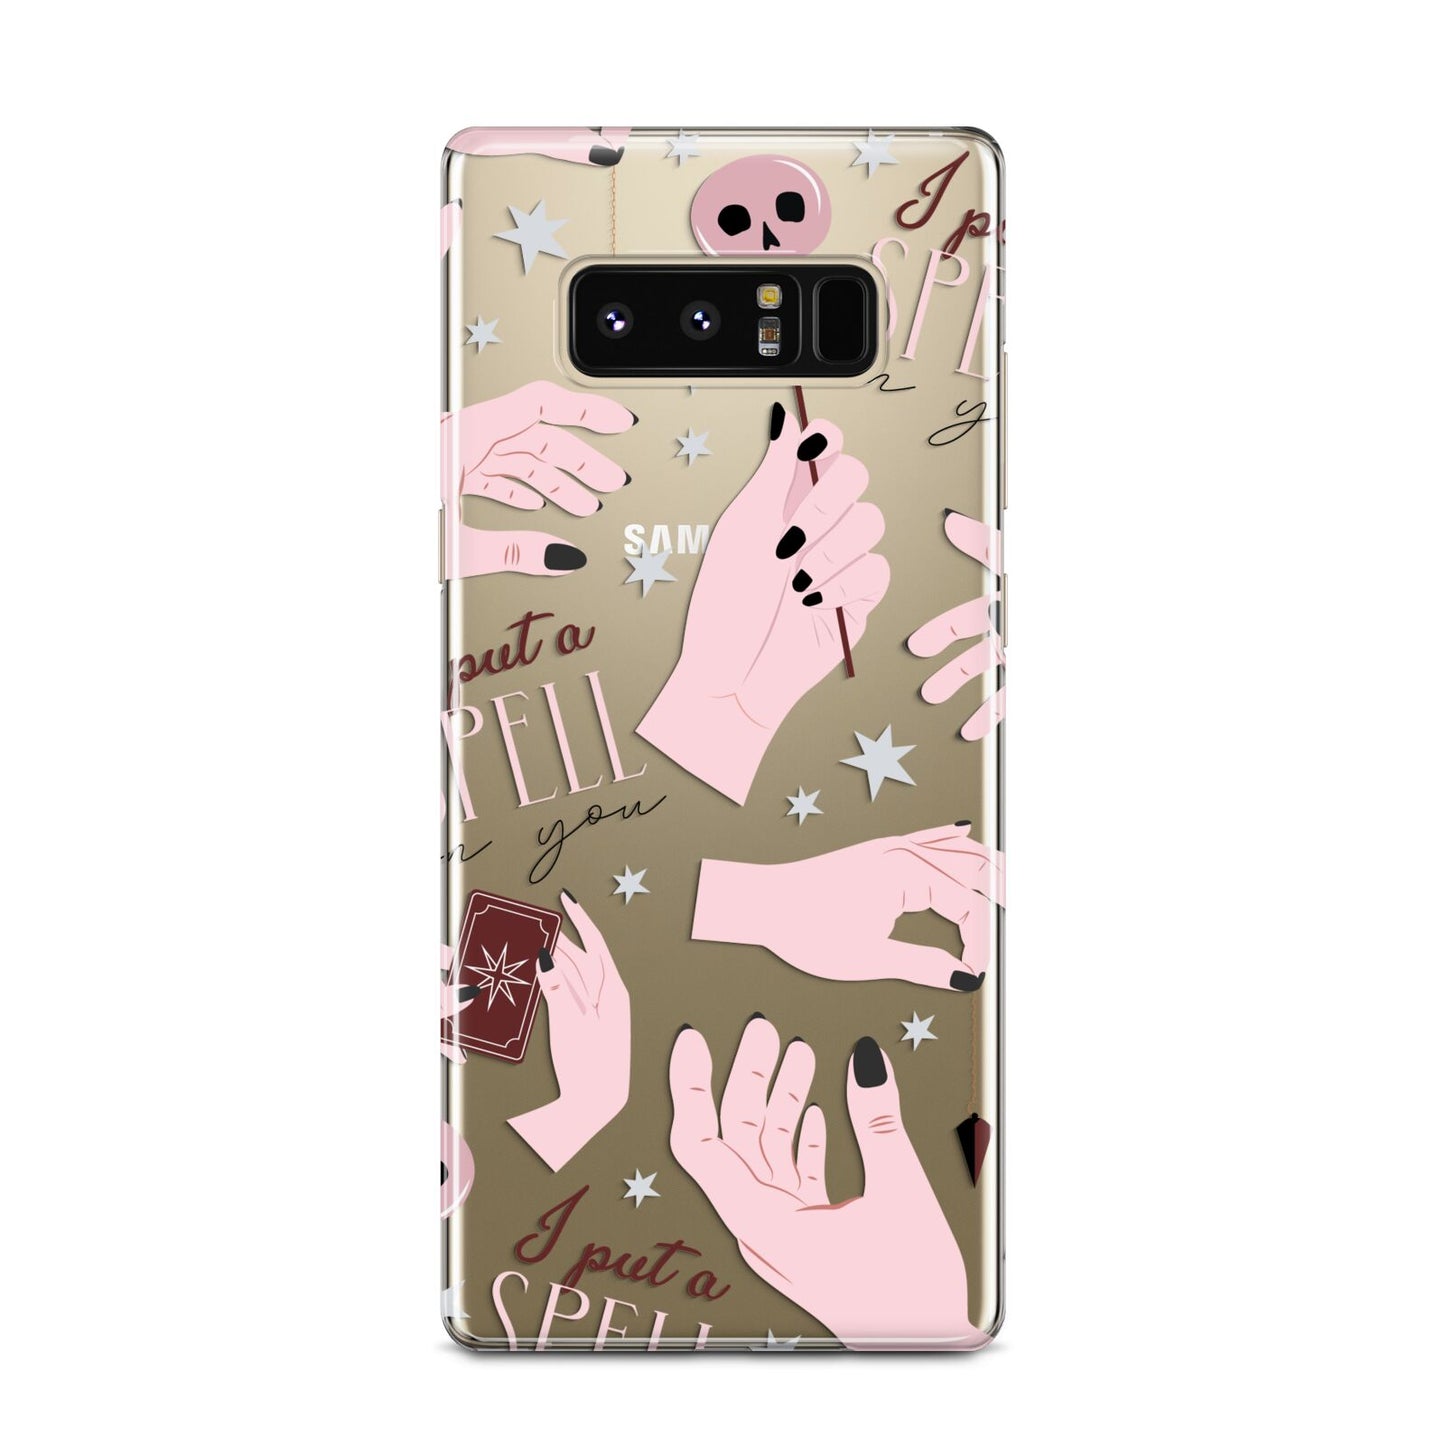 Witches Hands and Tarot Cards Samsung Galaxy Note 8 Case